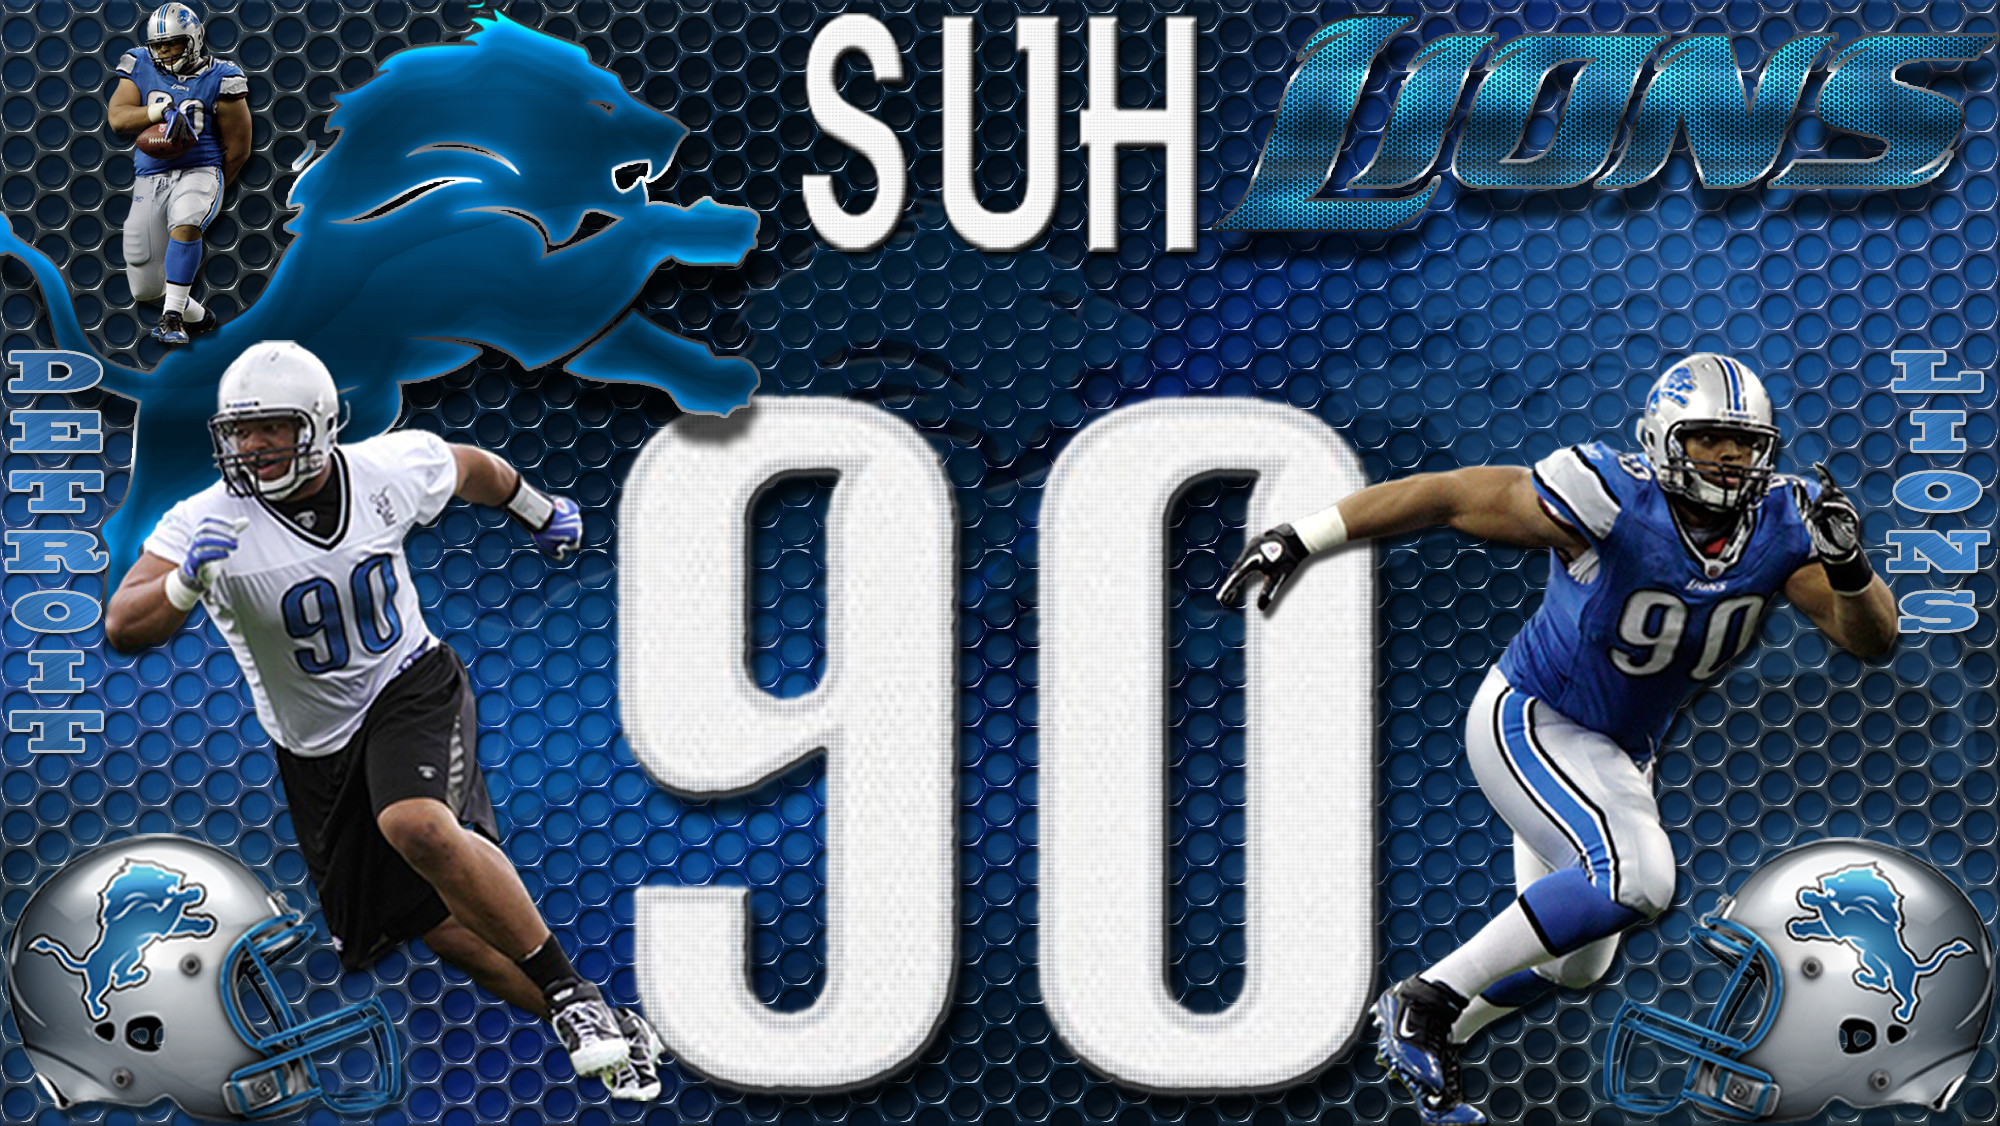 2000x1126 Detroit Lions images Ndamukong Suh Detroit Lions Heavy Metal 16x9 Wallpaper  HD wallpaper and background photos